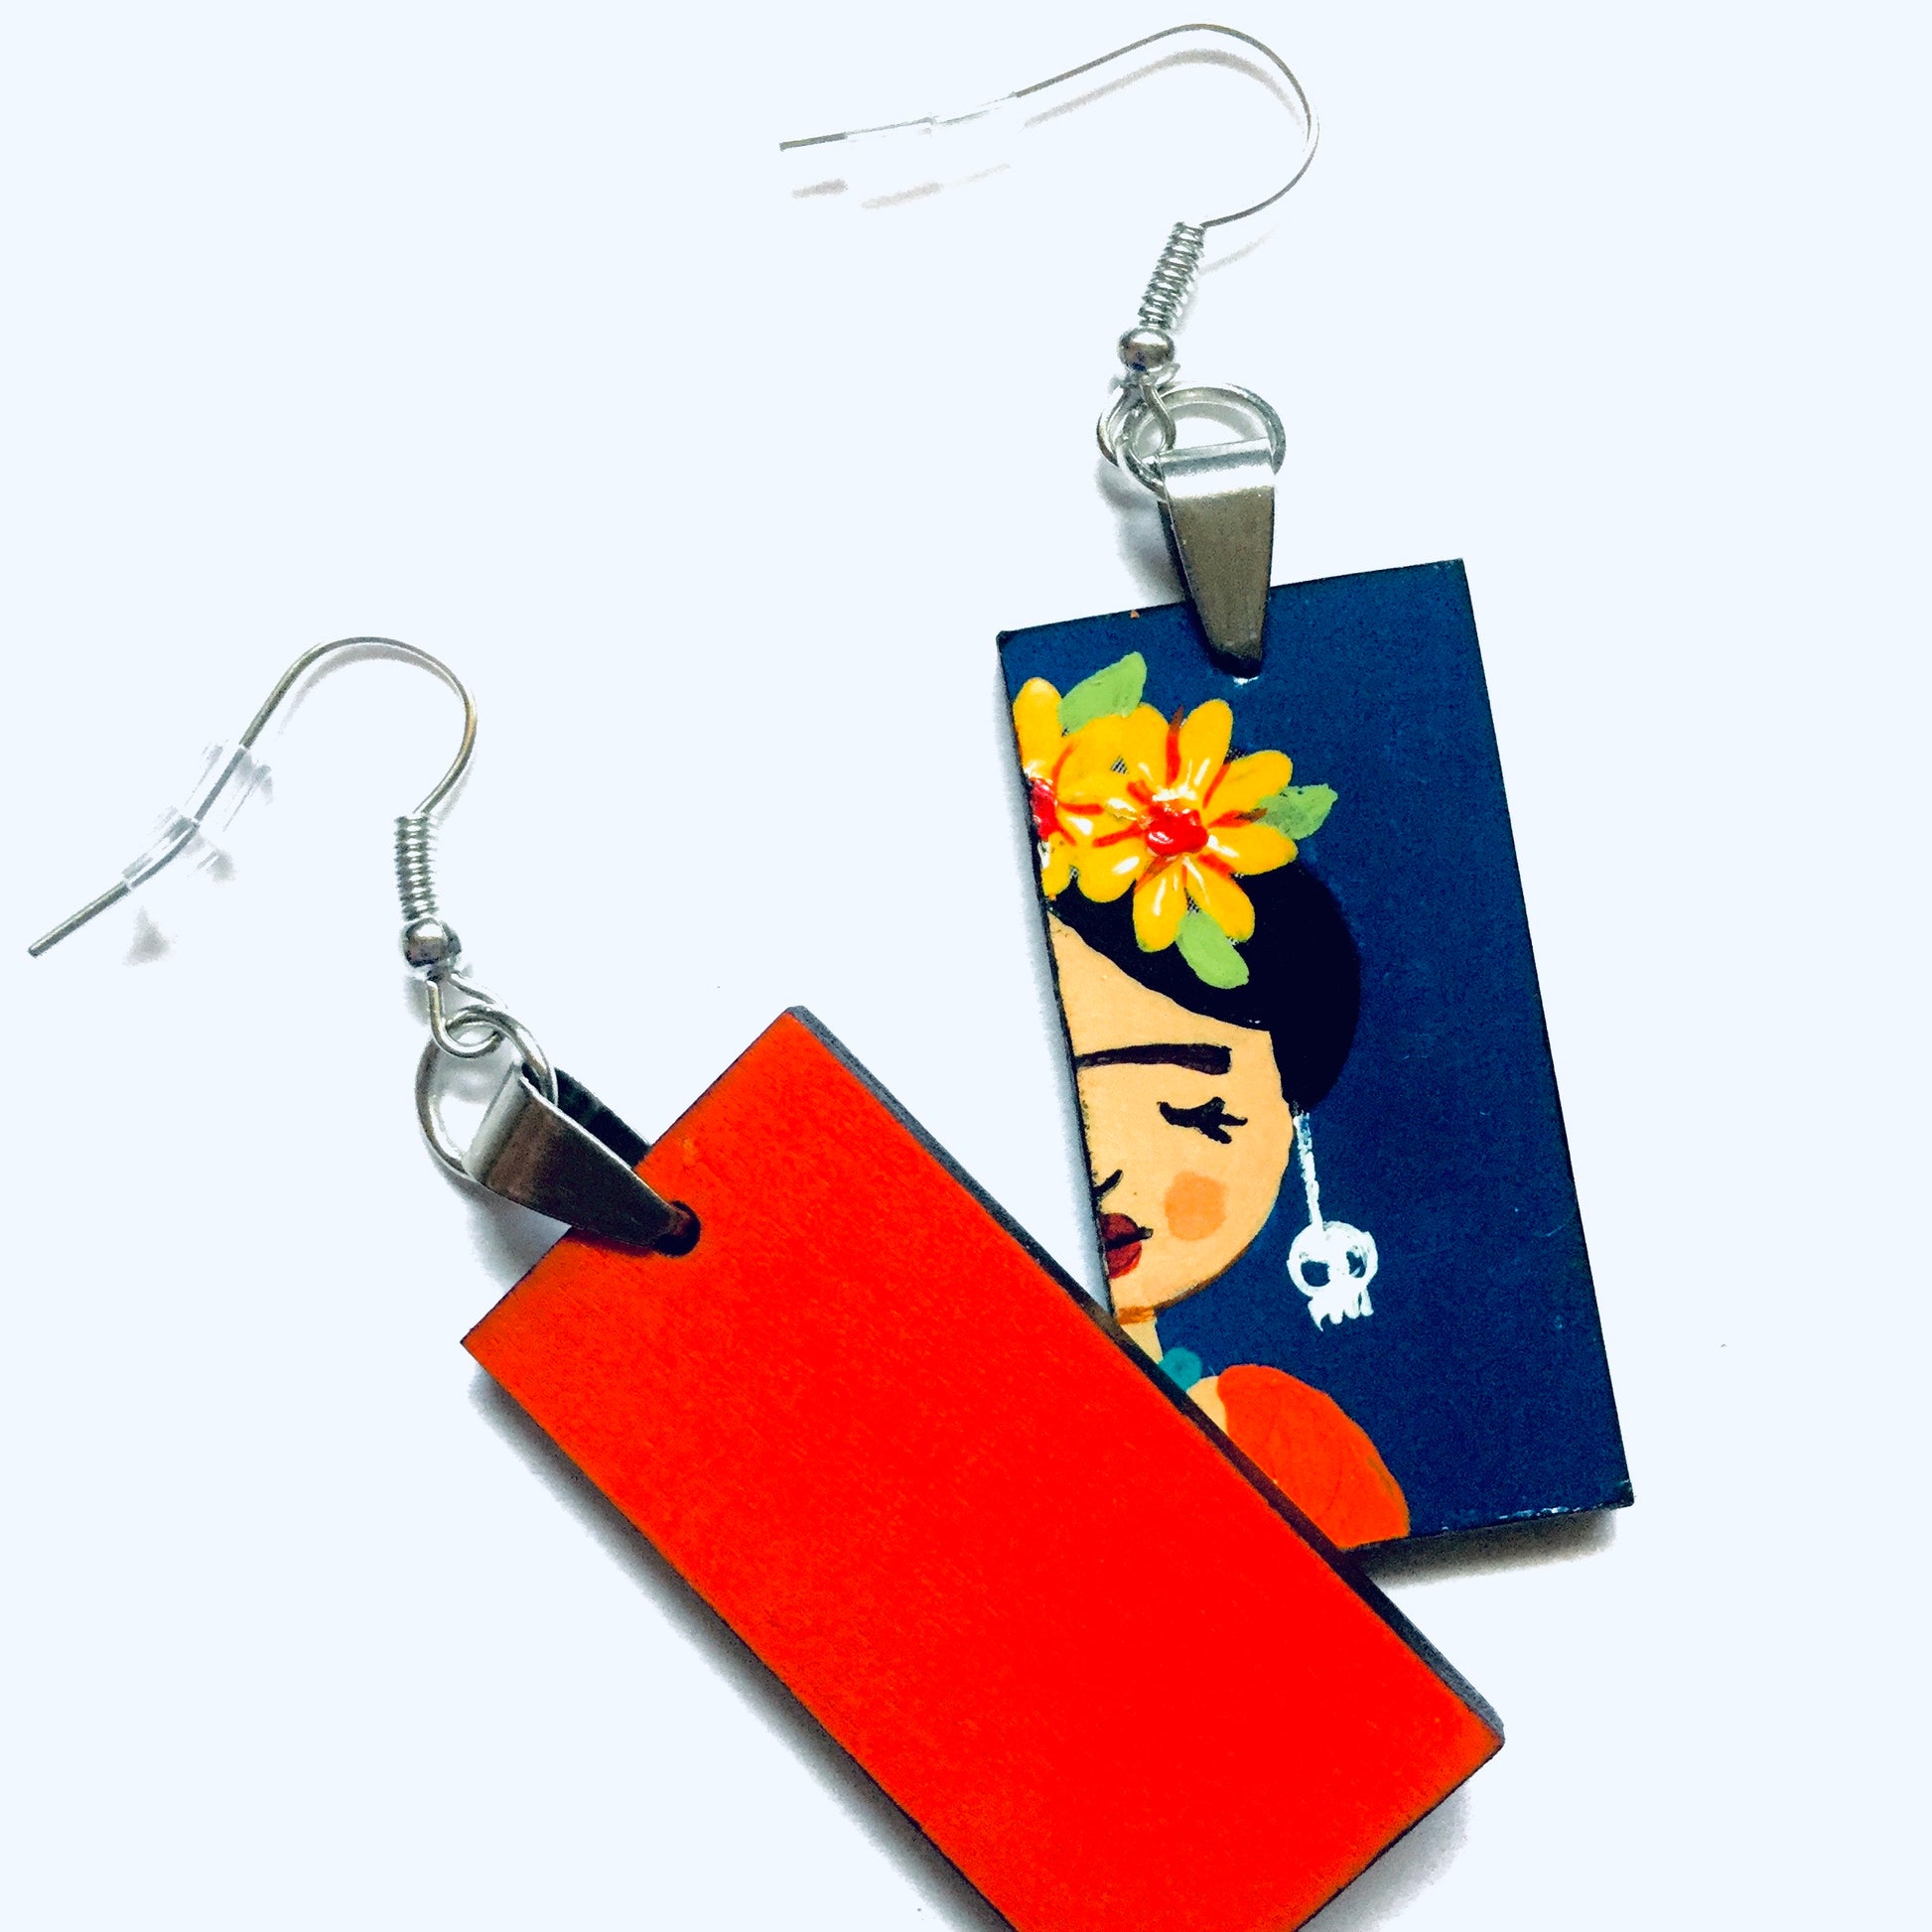 Frida Earrings: Hand painted Frida Kahlo earrings made of wood. Mexican jewelry. Acrylic blue indigo, orange, and yellow flowers. Girl gift idea. Trendy fashion. Aretes pintados a mano. Mexico folk art to wear-wearable art. Women and girls birthday gift idea